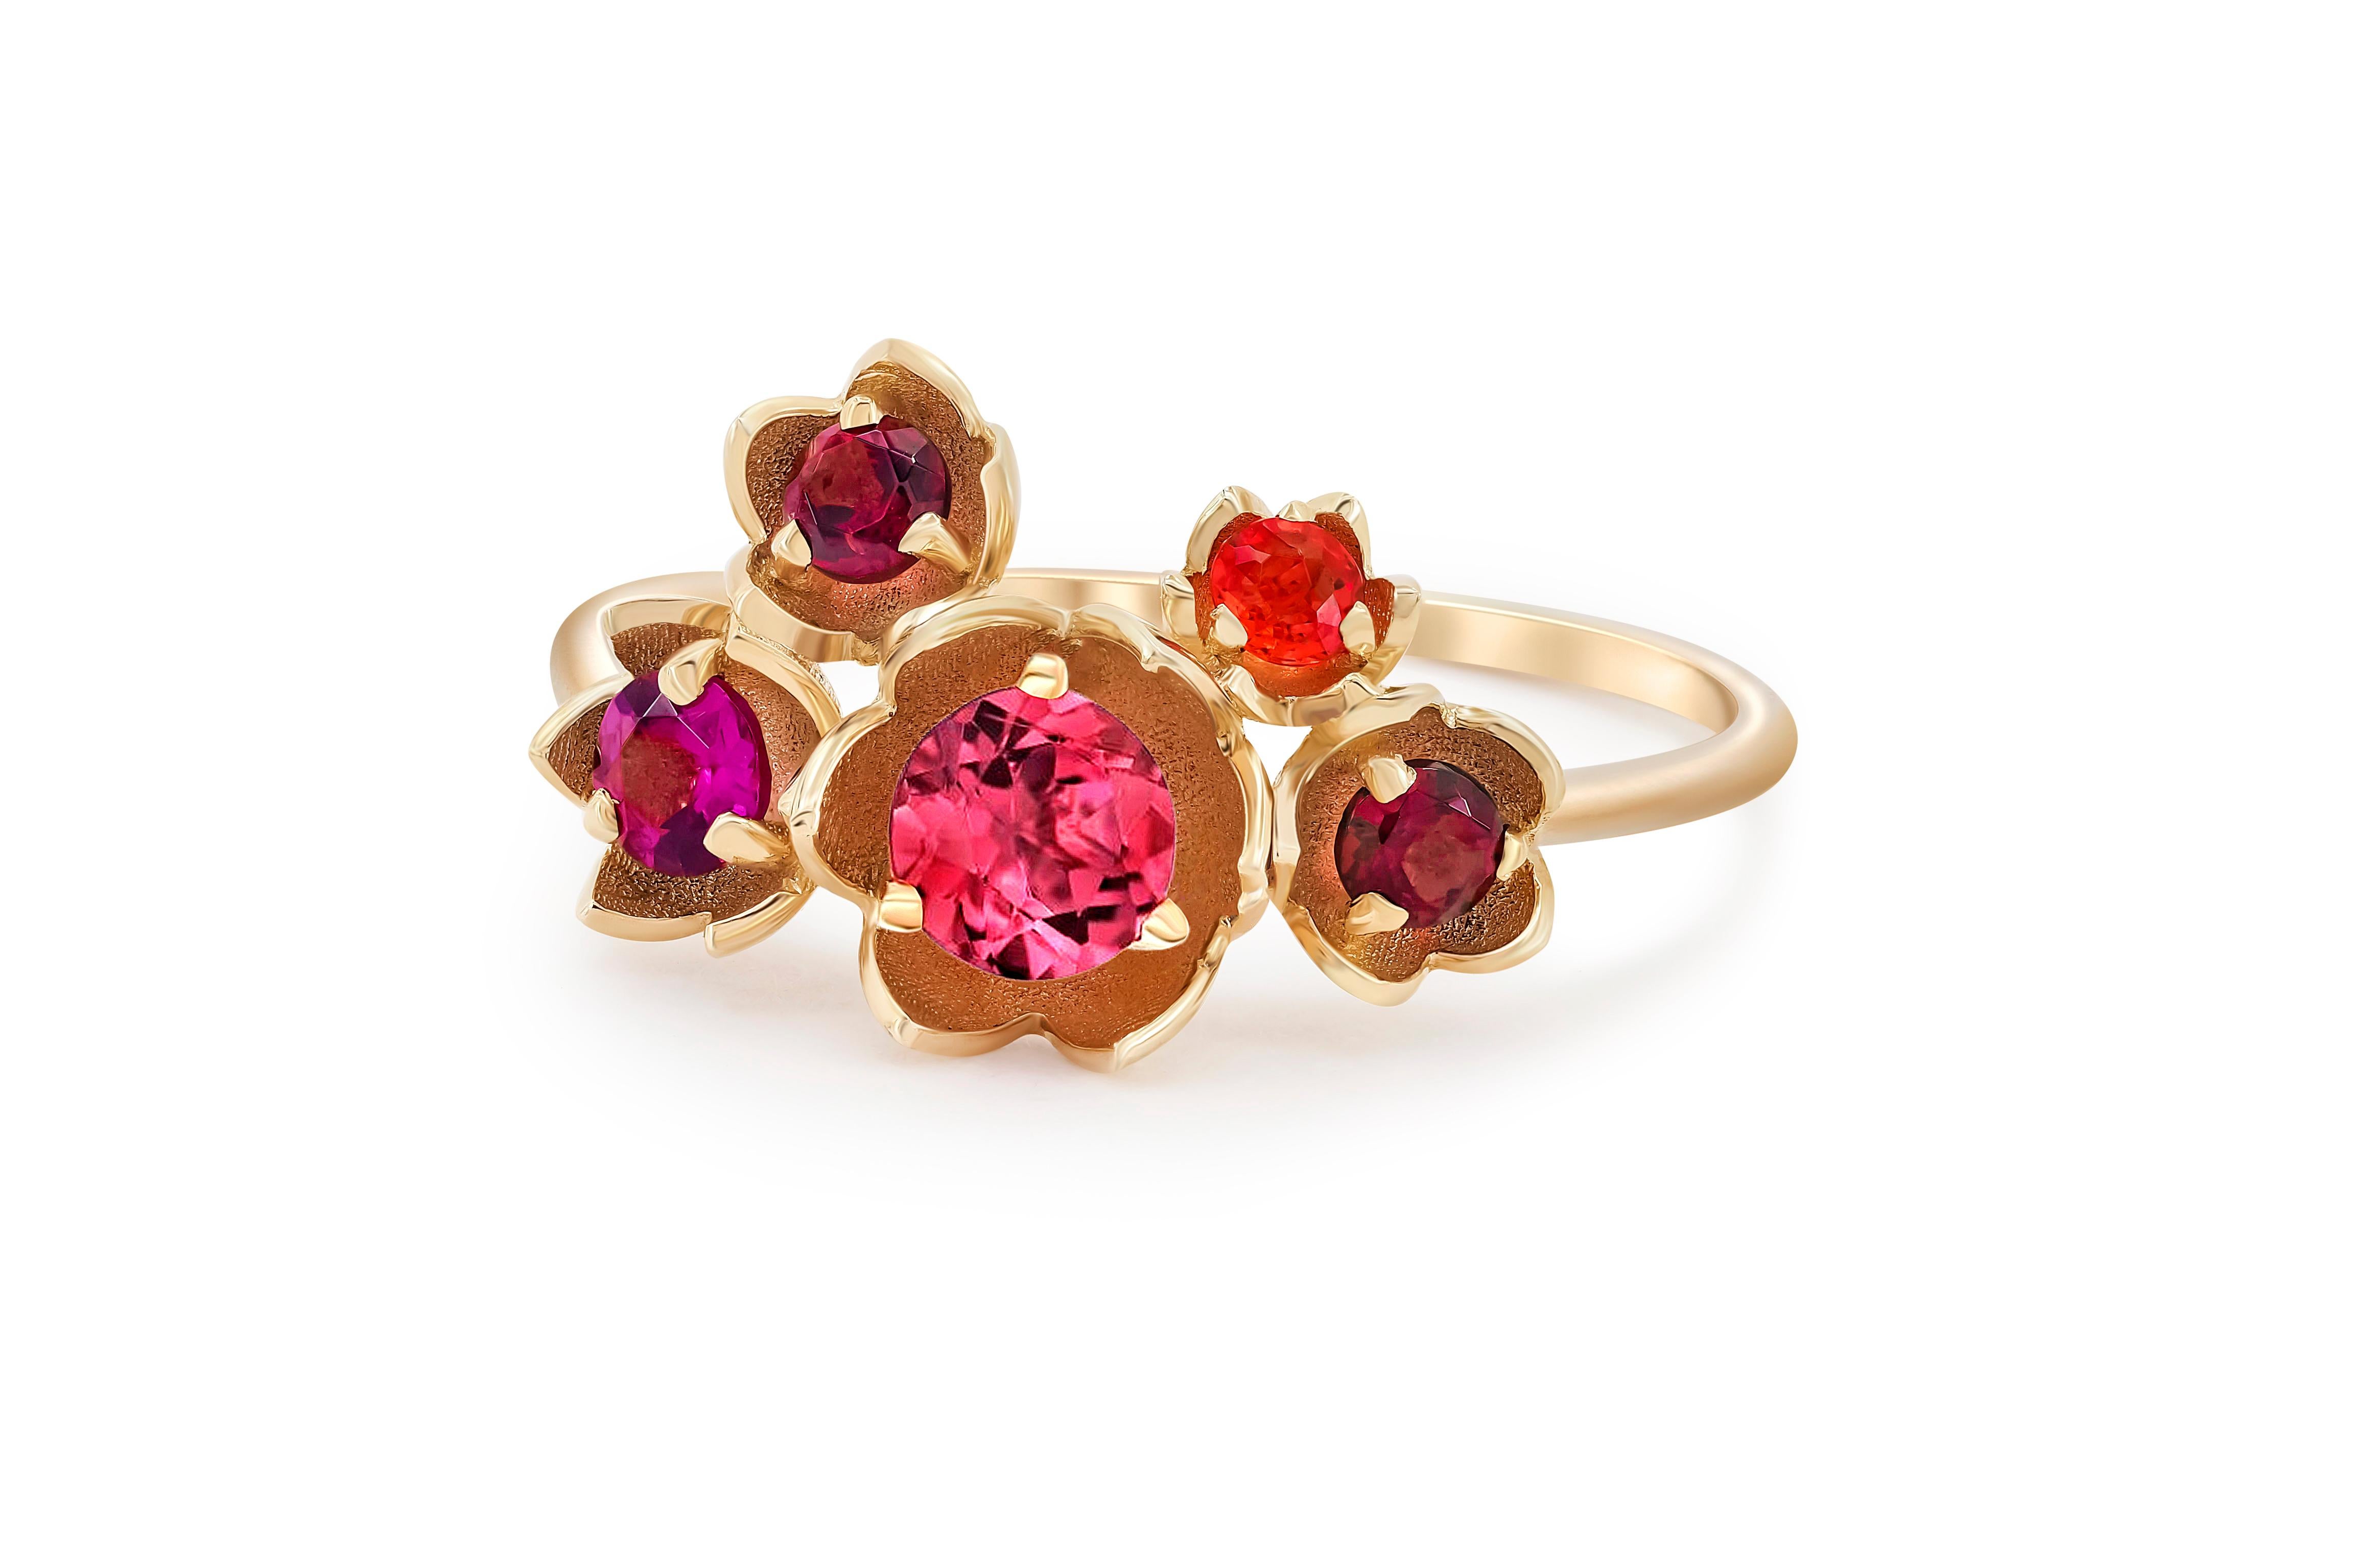 Gold blossom flower ring. 
Pink tourmaline ring in 14k gold. Pink gemstones ring. Flower bouquet ring. Tourmaline, sapphires, amethyst ring.

Weight: 1.8 g. depends from size
Gold: 14k gold.

Central stone: tourmaline
Cut: round
Weight: aprx 0.52